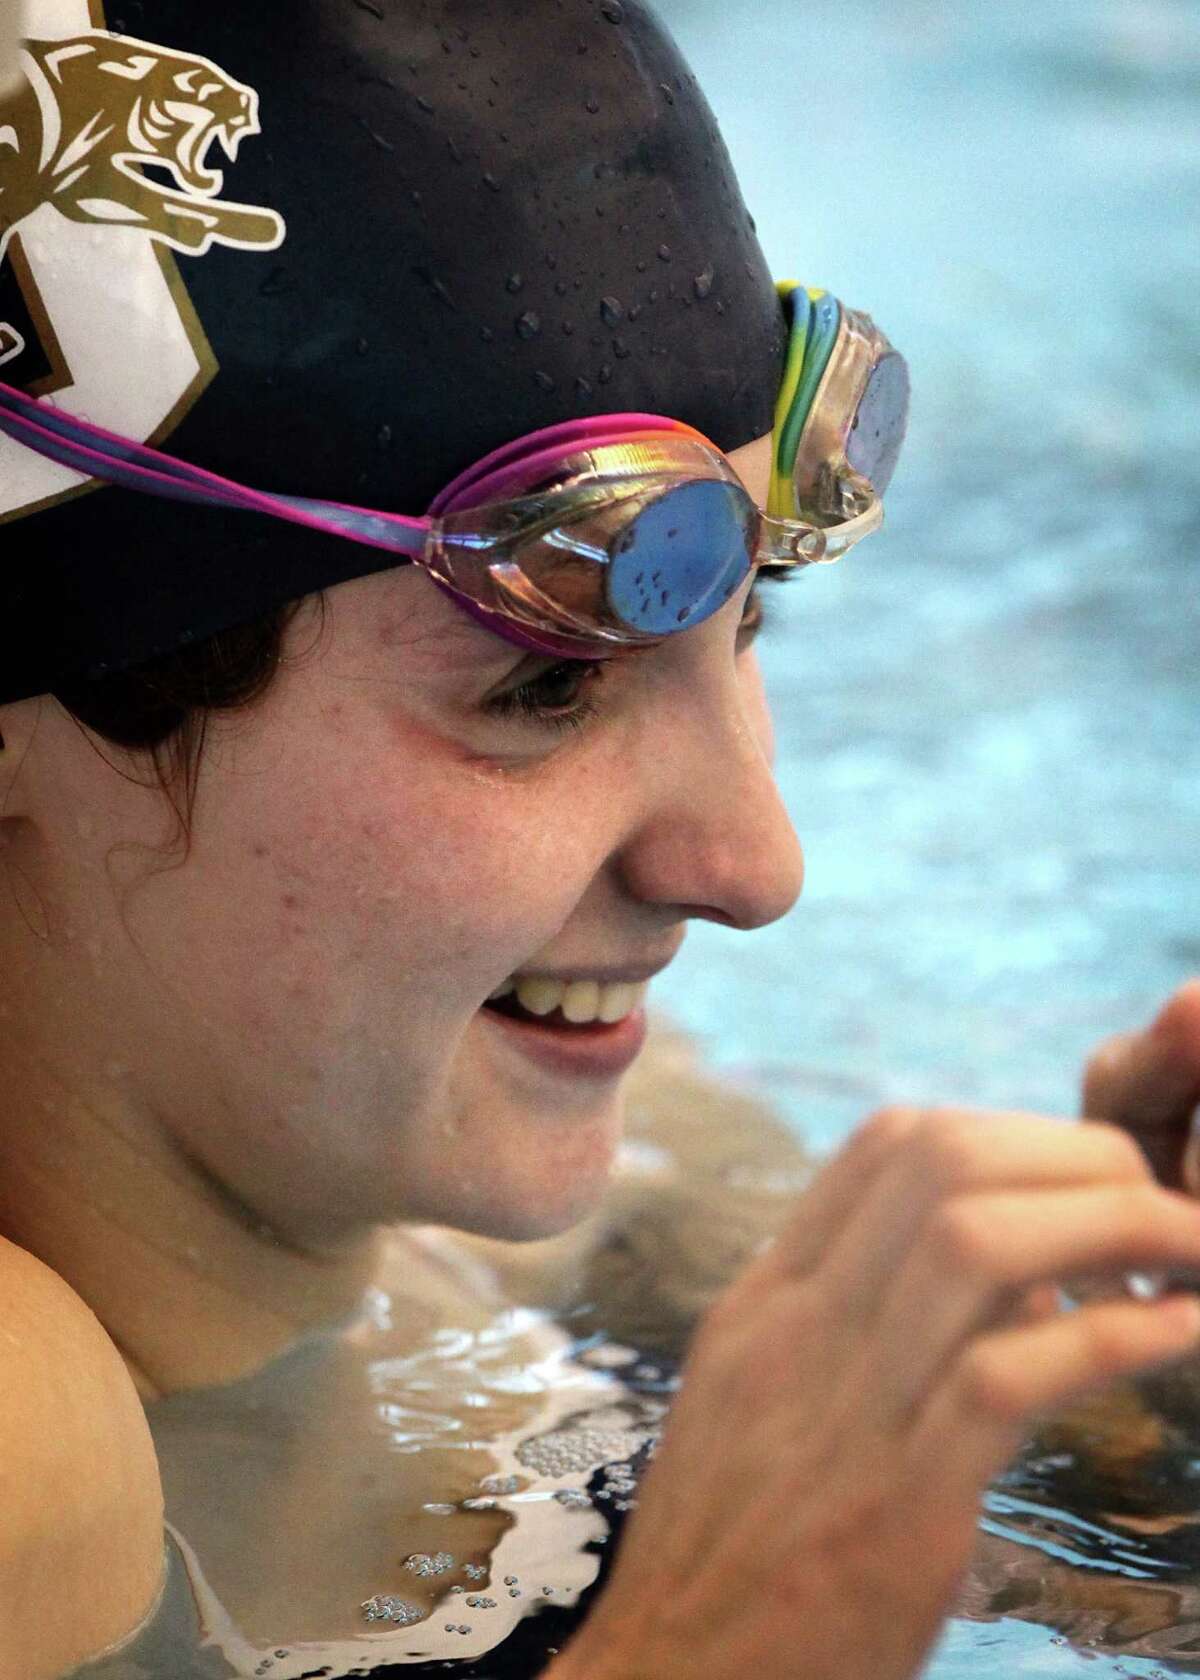 Abby McAlpin, a medal winner in this year's World Deaf Swimming Championships, practices at Northside Natatorium. The junior at O'Connor High School plans to return to the 2013 Deaflympics. Friday, Nov. 18, 2011. Photo Bob Owen/rowen@express-news.net